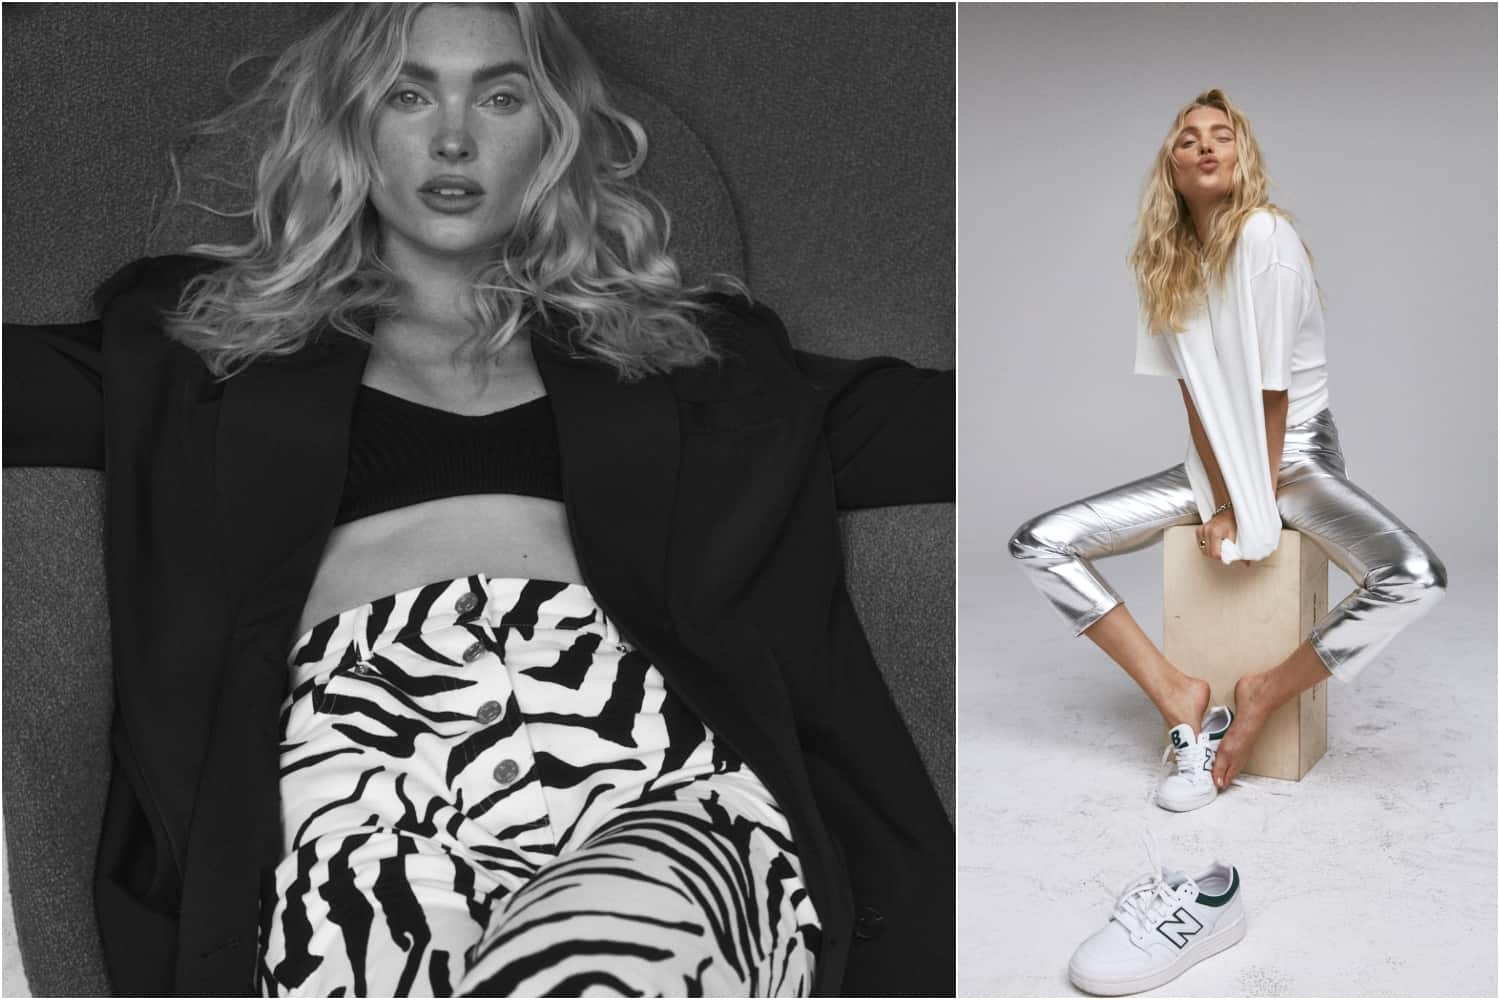 Steal Her Style! A Sneak Peek At Elsa Hosk x 4th + Reckless